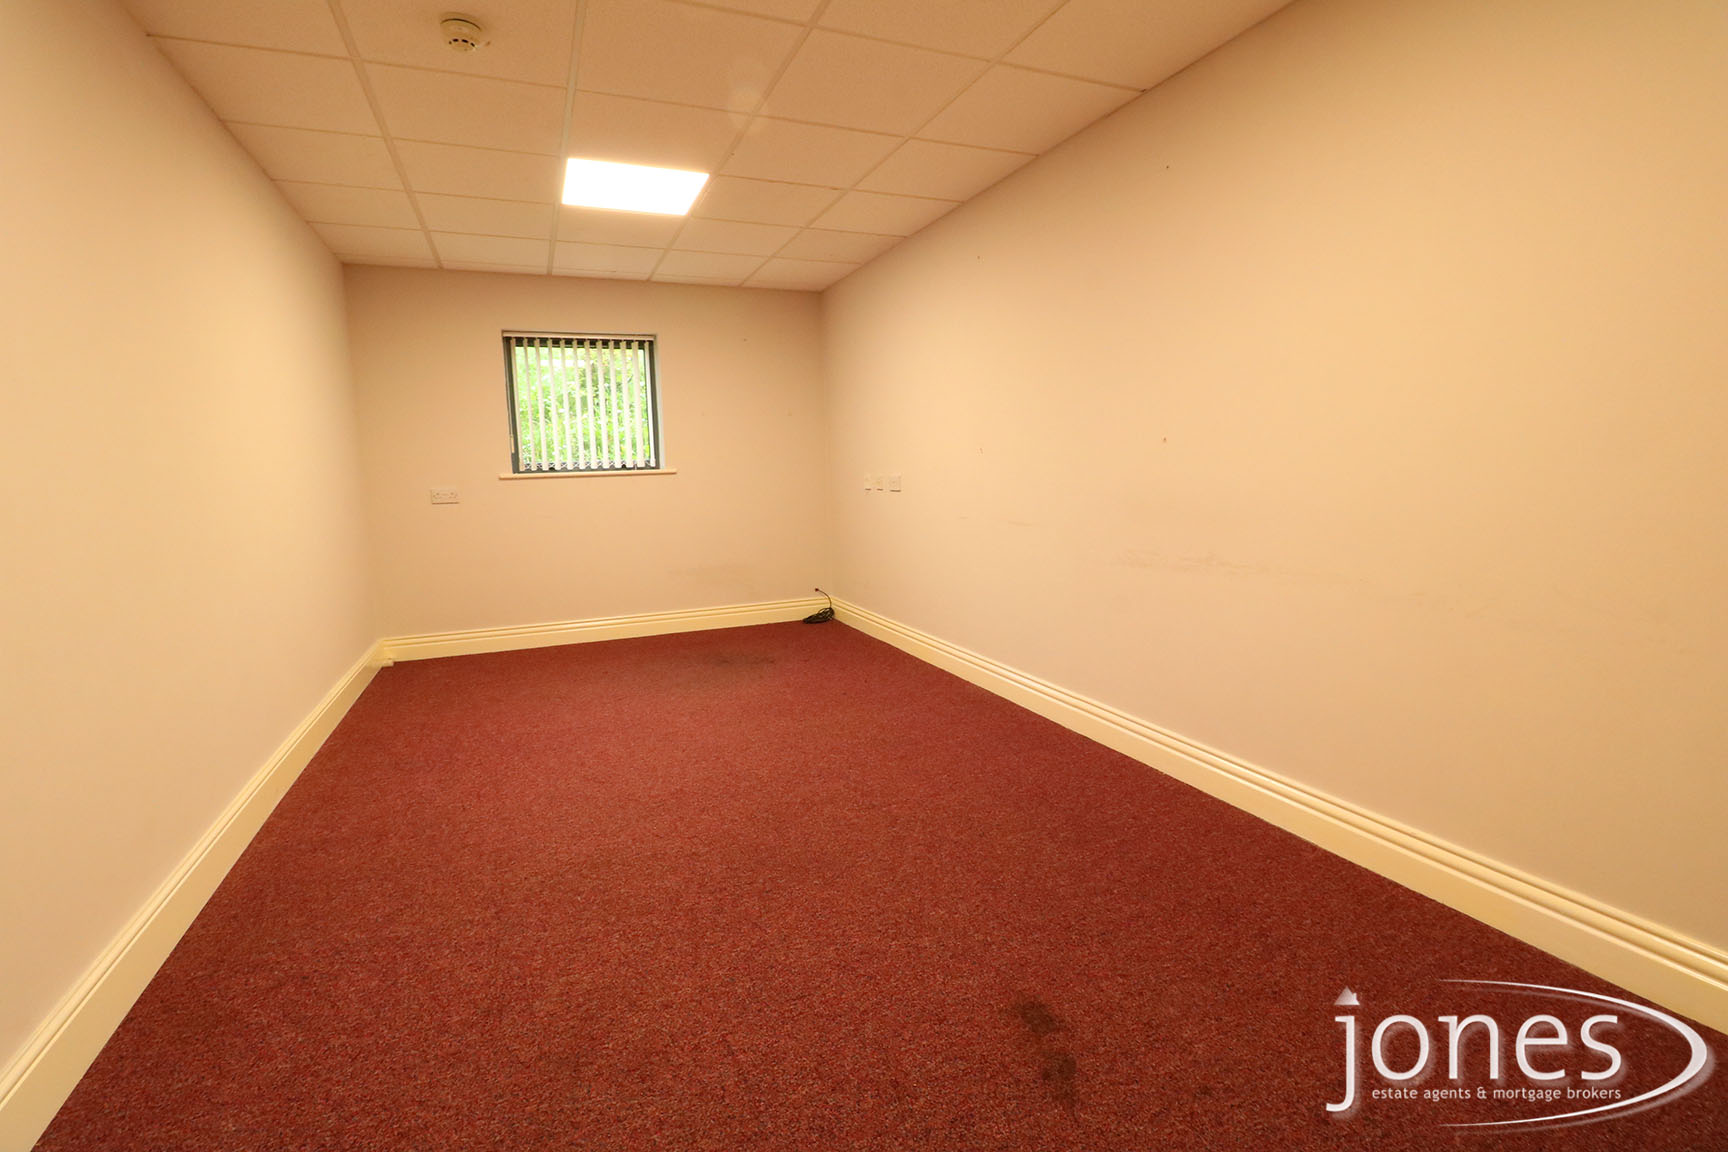 Home for Sale Let - Photo 09 Durham Tees Valley Business Centre Orde Wingate Way Primrose Hill Industrial Estate Stockton on Tees TS19 0GD